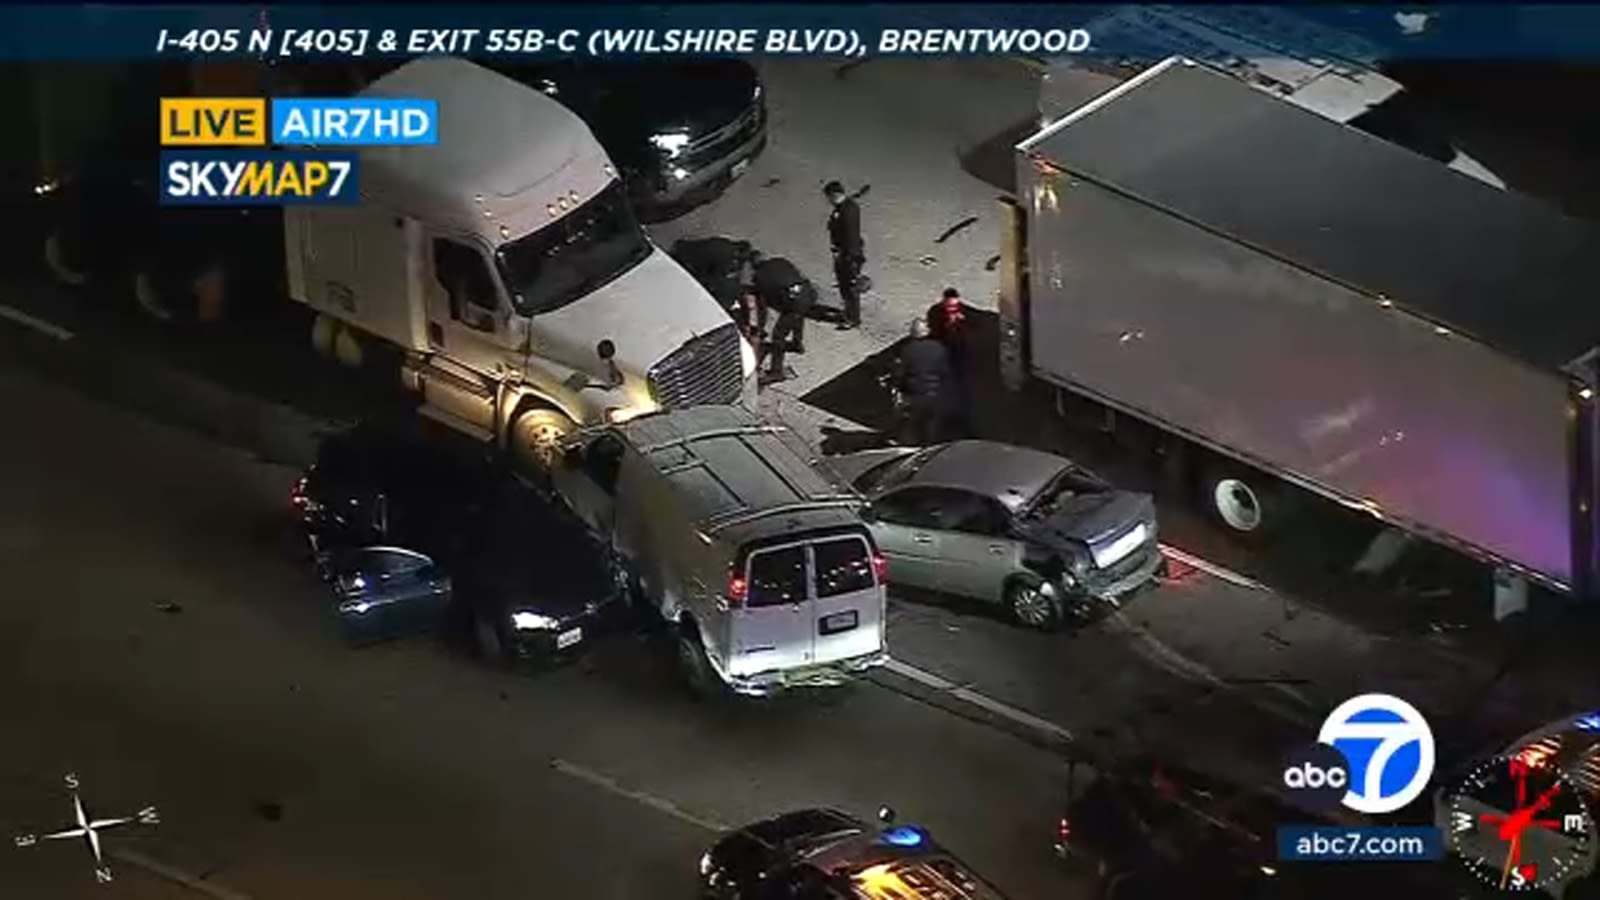 Chase suspect driving wrong-way crashes into oncoming traffic on 405 Freeway in Brentwood